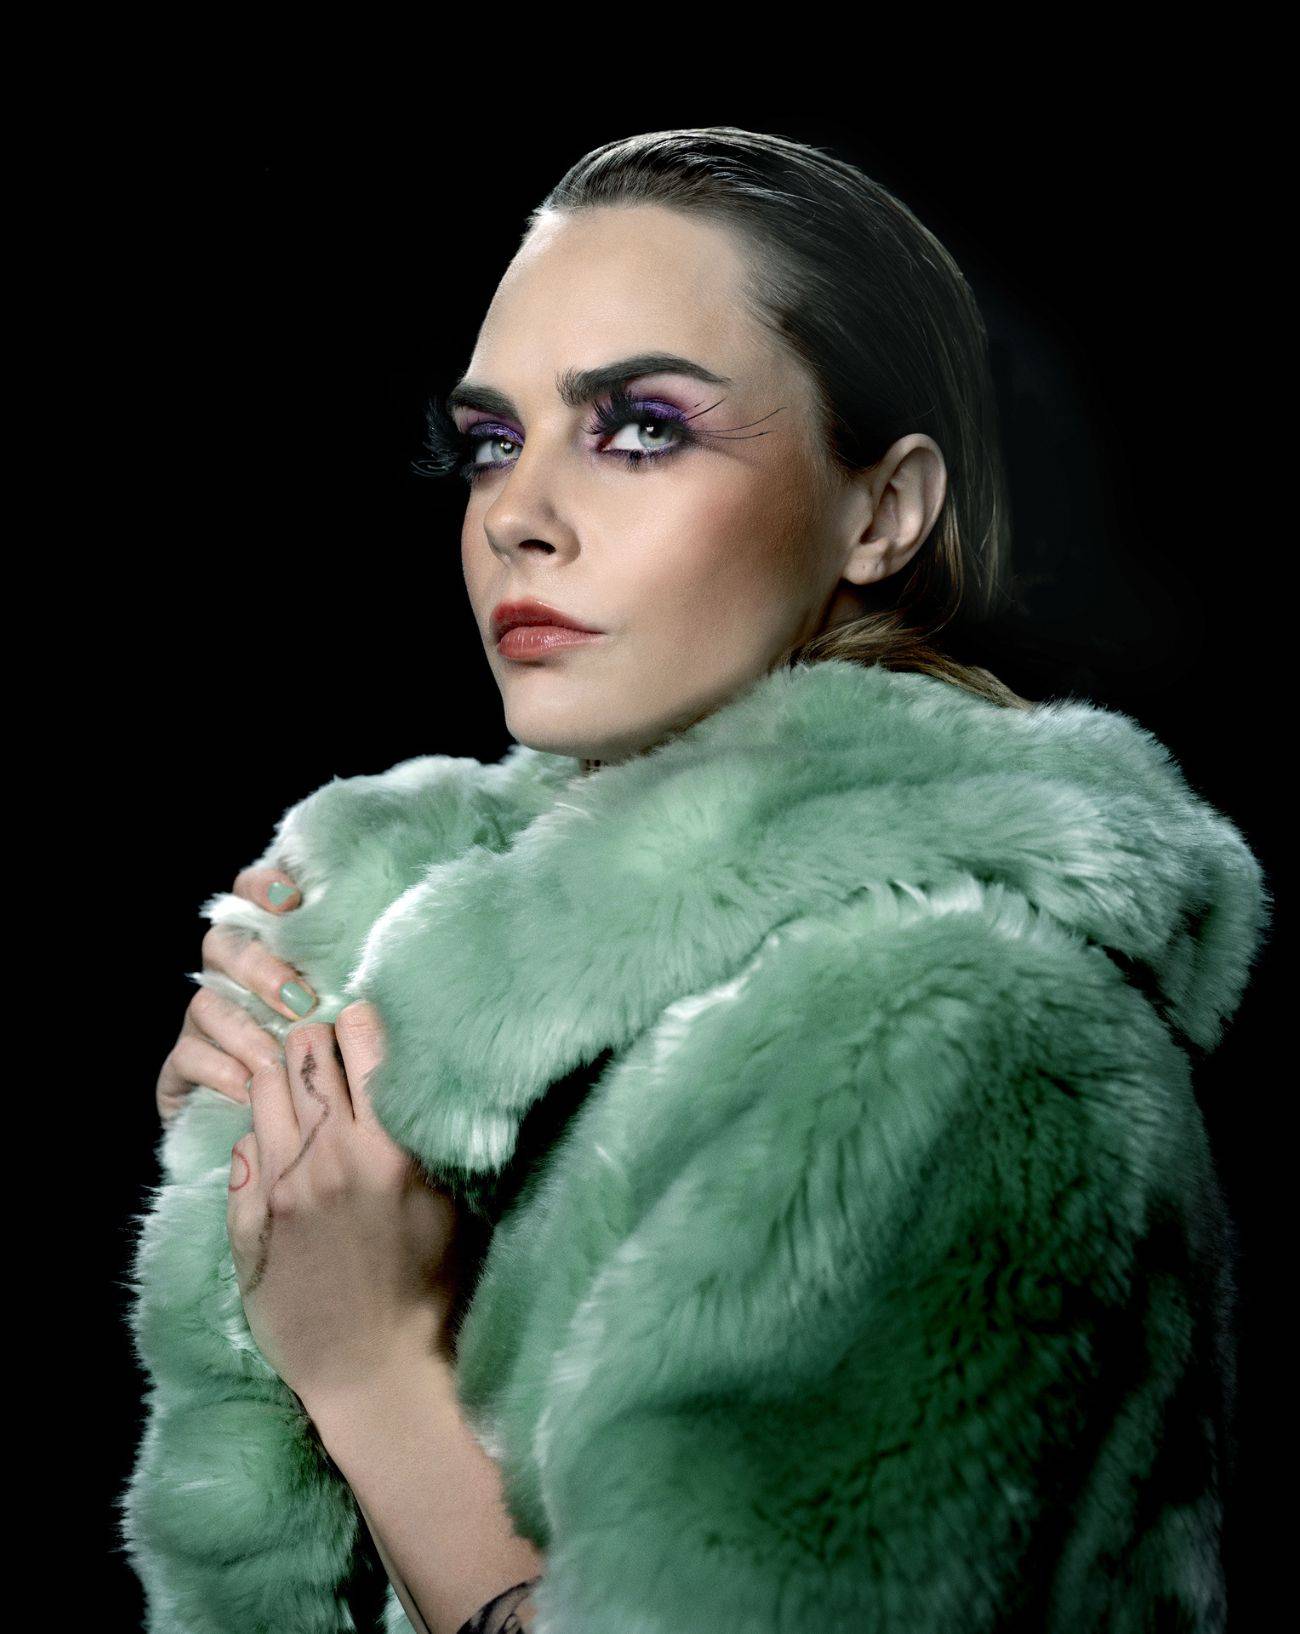 Cara Delevingne, Cabaret, Londres, Comedie Musicale, Sally Bowles